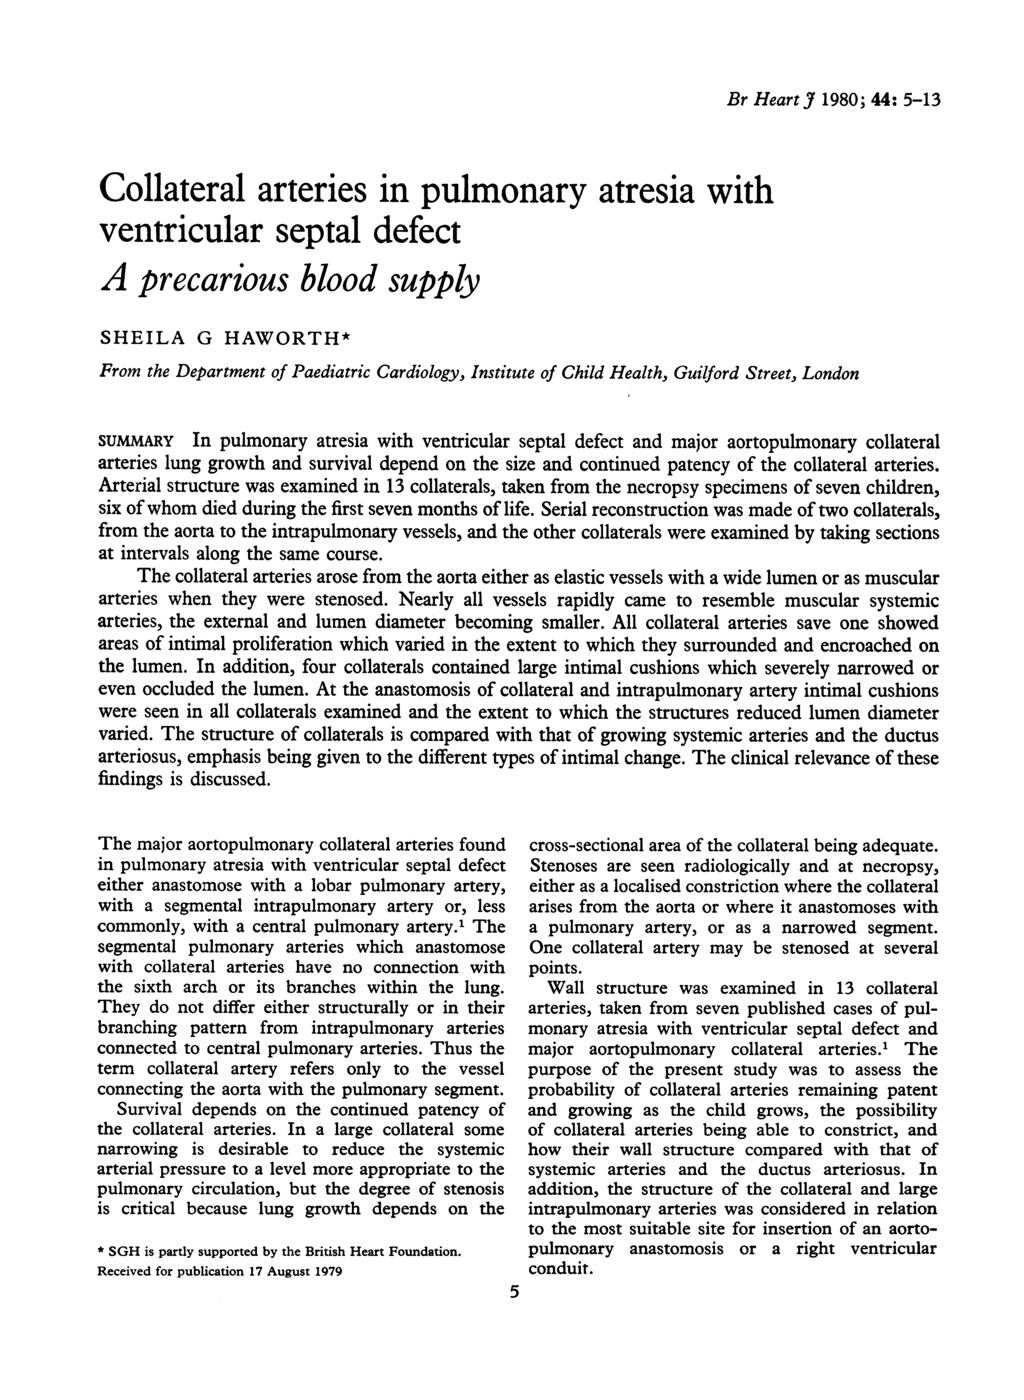 Collateral arteries in pulmonary atresia with ventricular septal defect A precarious blood supply SHEILA G HAWORTH* Br HeartJ 1980; 44: 5-13 From the Department of Paediatric Cardiology, Institute of